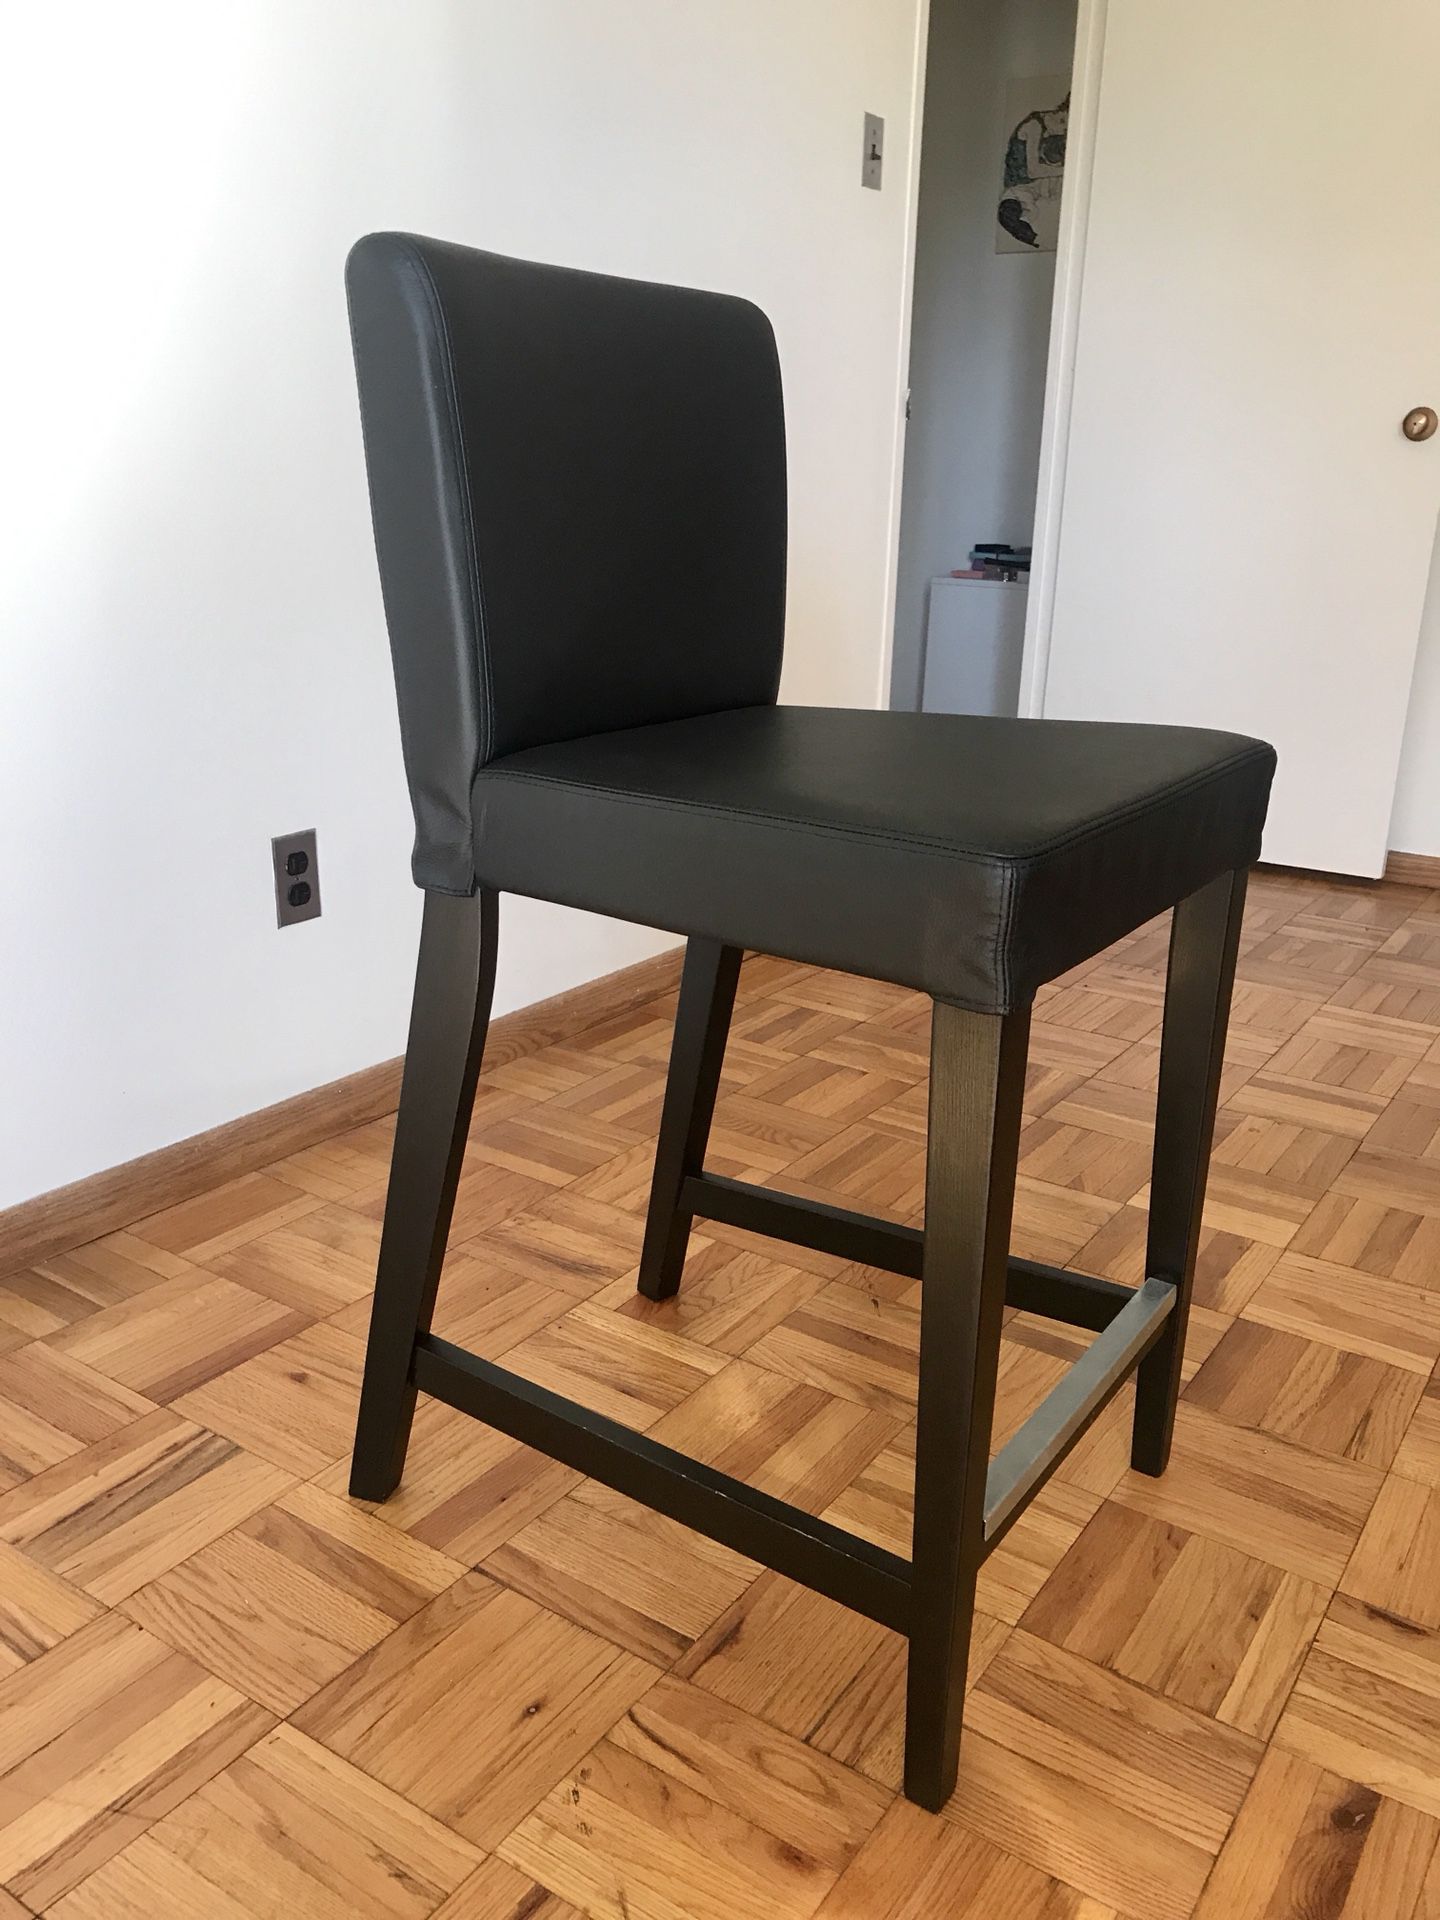 Bar chair, brown black, see 5th photo for details and measurements